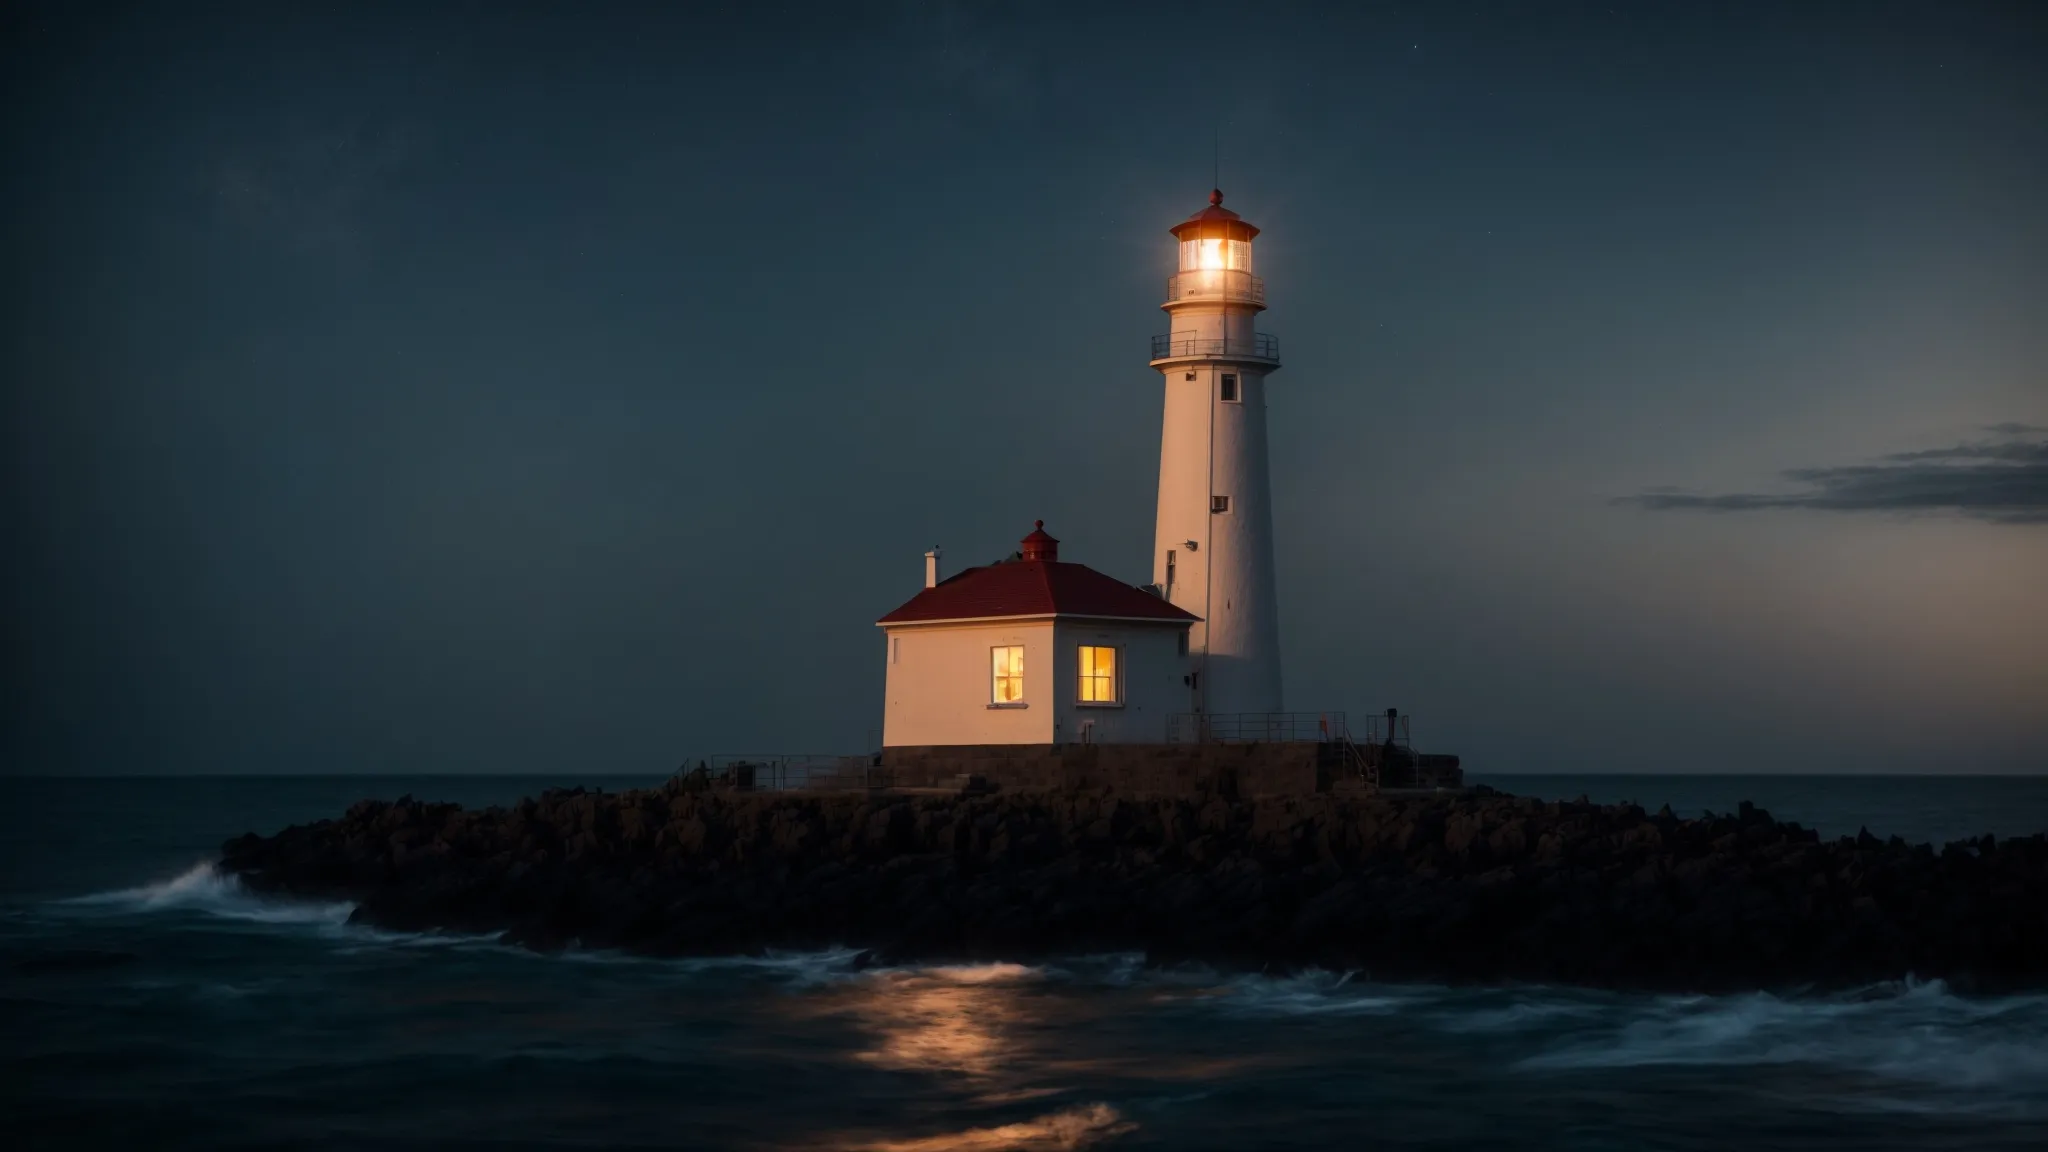 a lighthouse stands tall at the edge of a vast ocean, illuminating the path for distant ships under a starry sky.